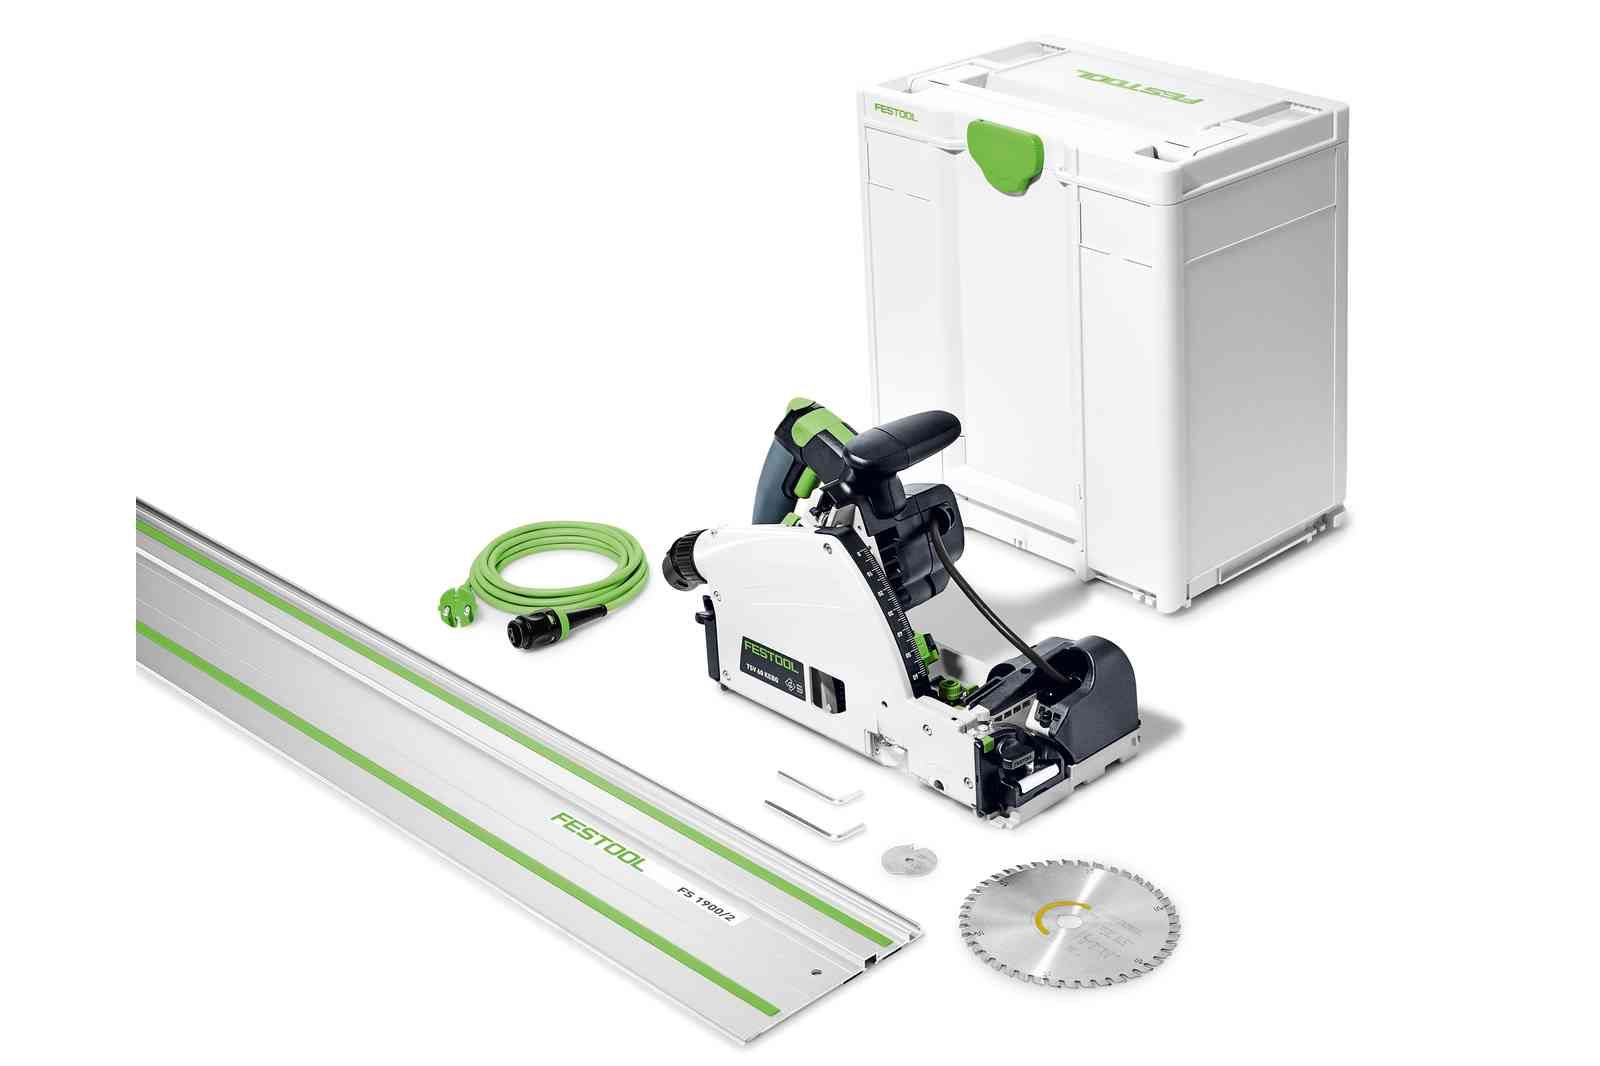 TSV 60K 168mm Plunge Cut Scoring Saw in Systainer with 1900mm Rail 577745 by Festool